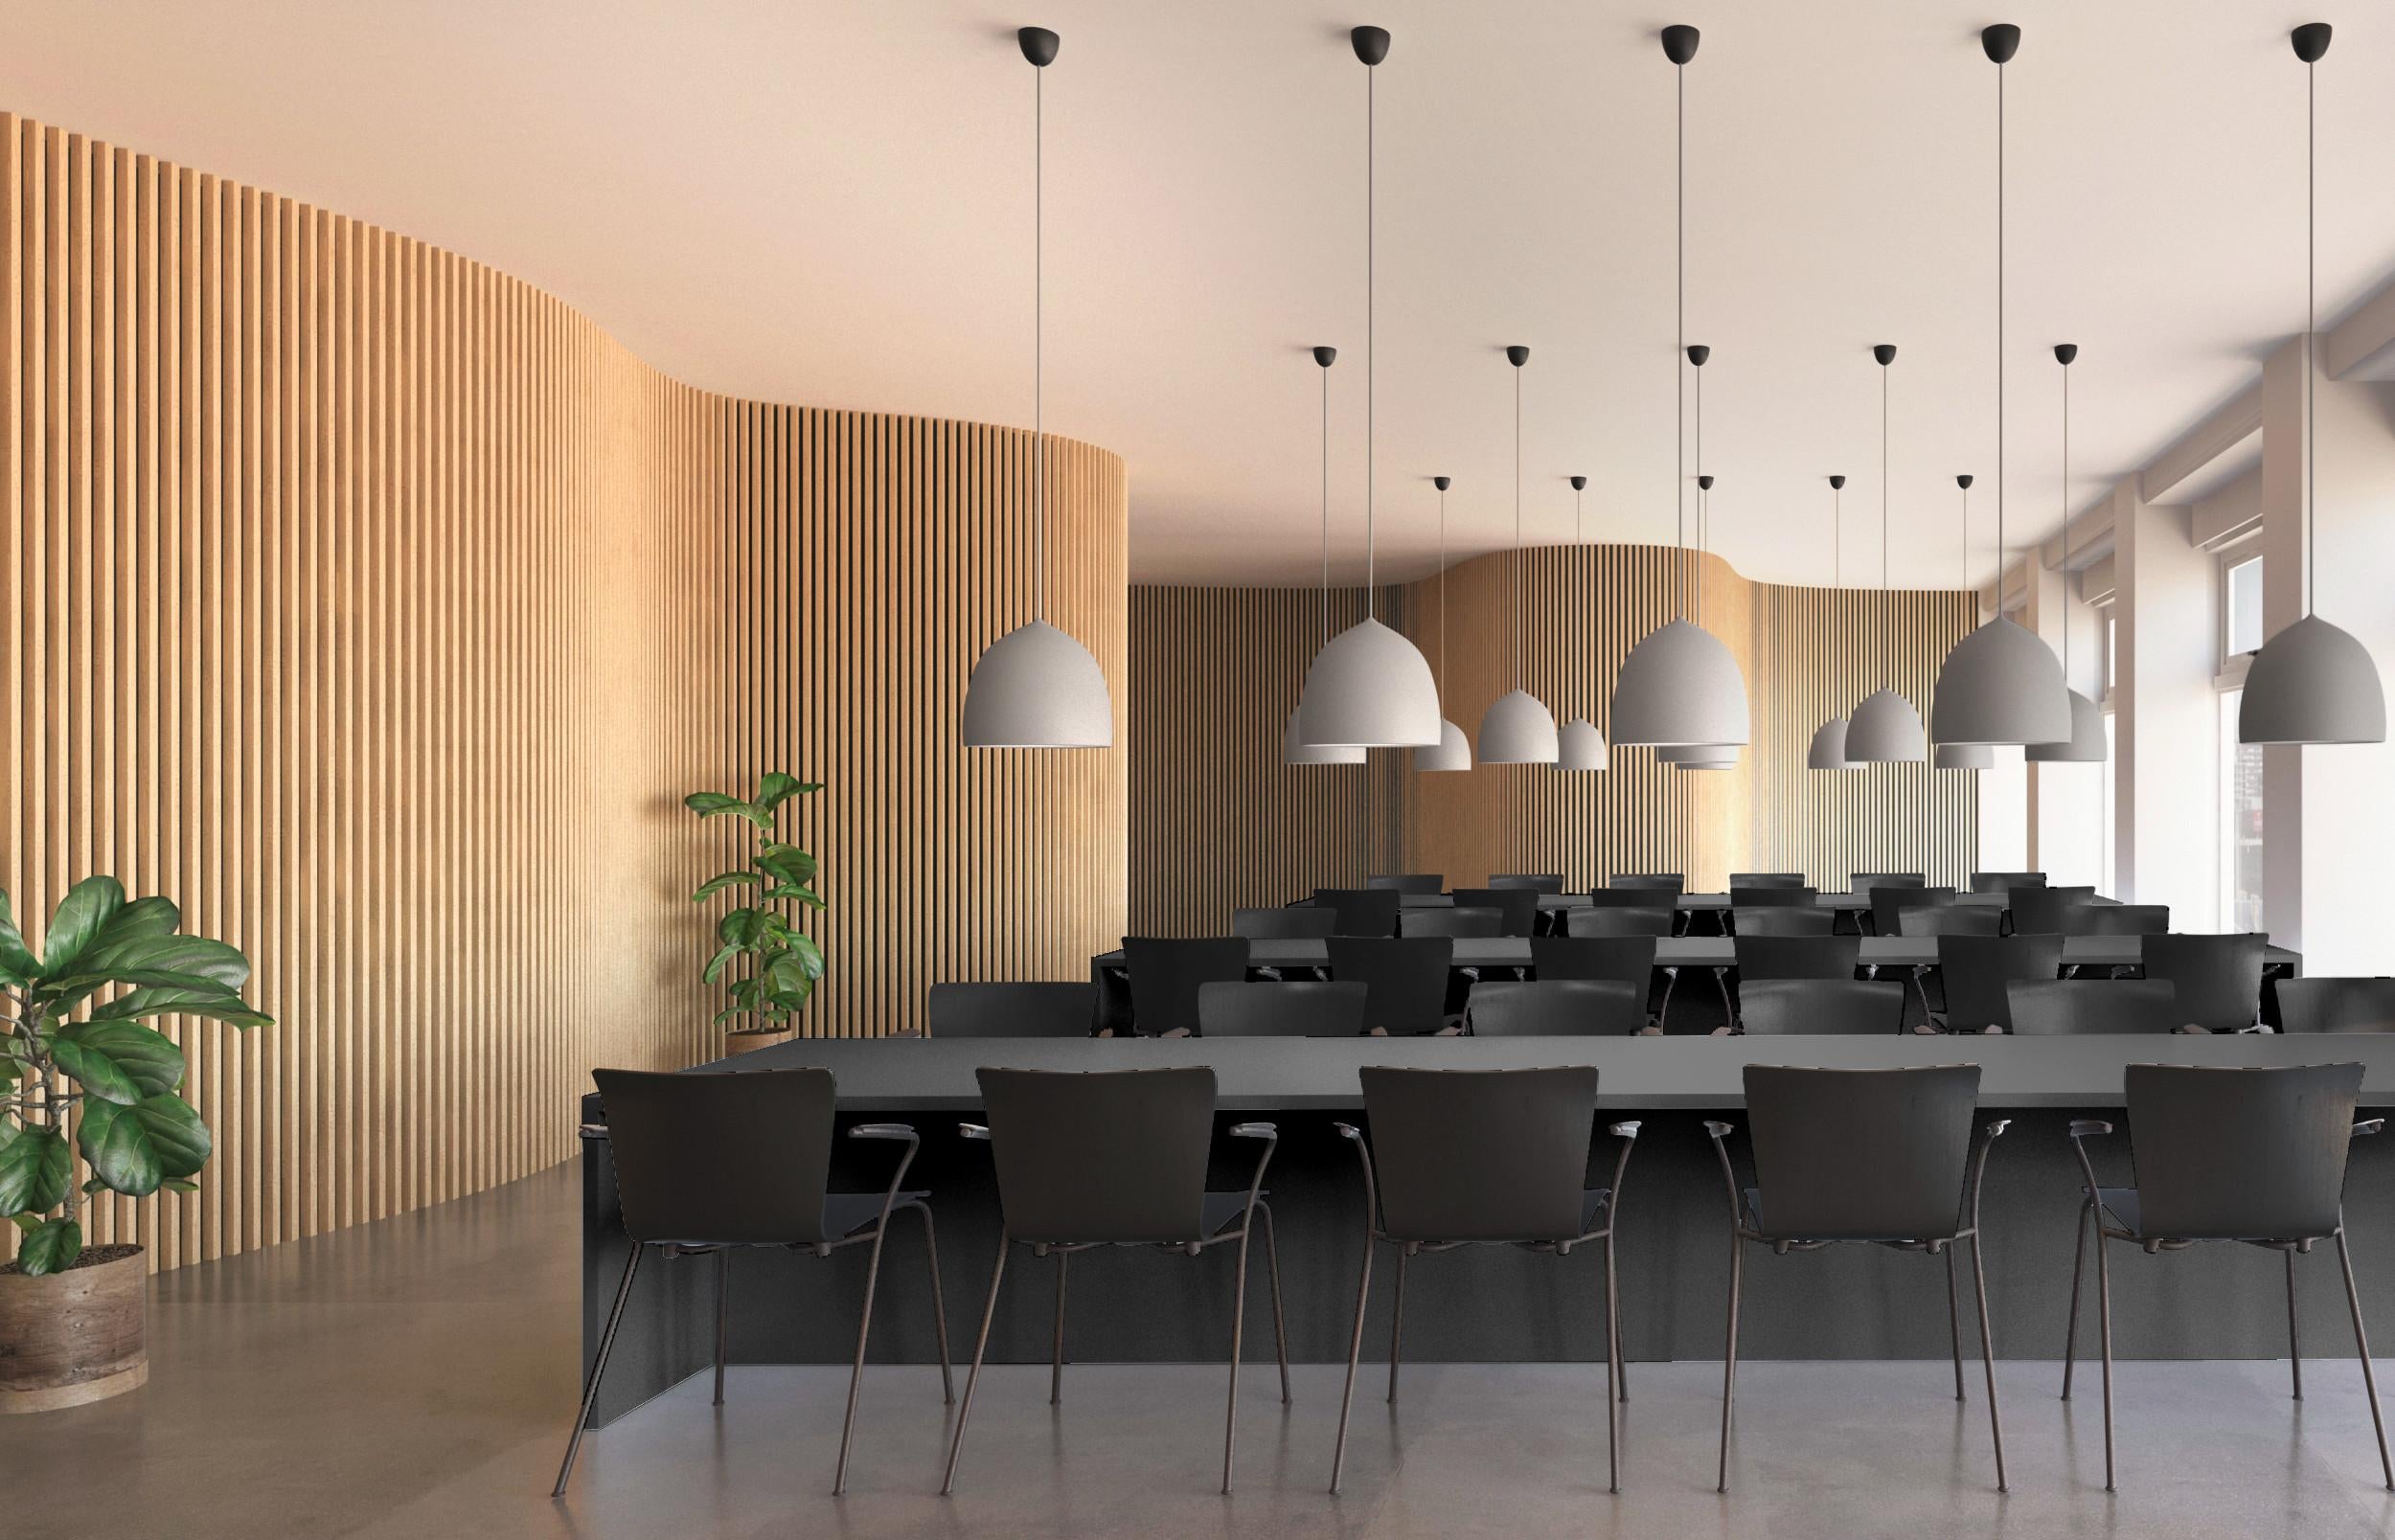 GamFratesi 'Suspence P1' Pendant Lamp for Fritz Hansen in White.

Established in 1872, Fritz Hansen has become synonymous with legendary Danish design. Combining timeless craftsmanship with an emphasis on sustainability, the brand’s re-editions of